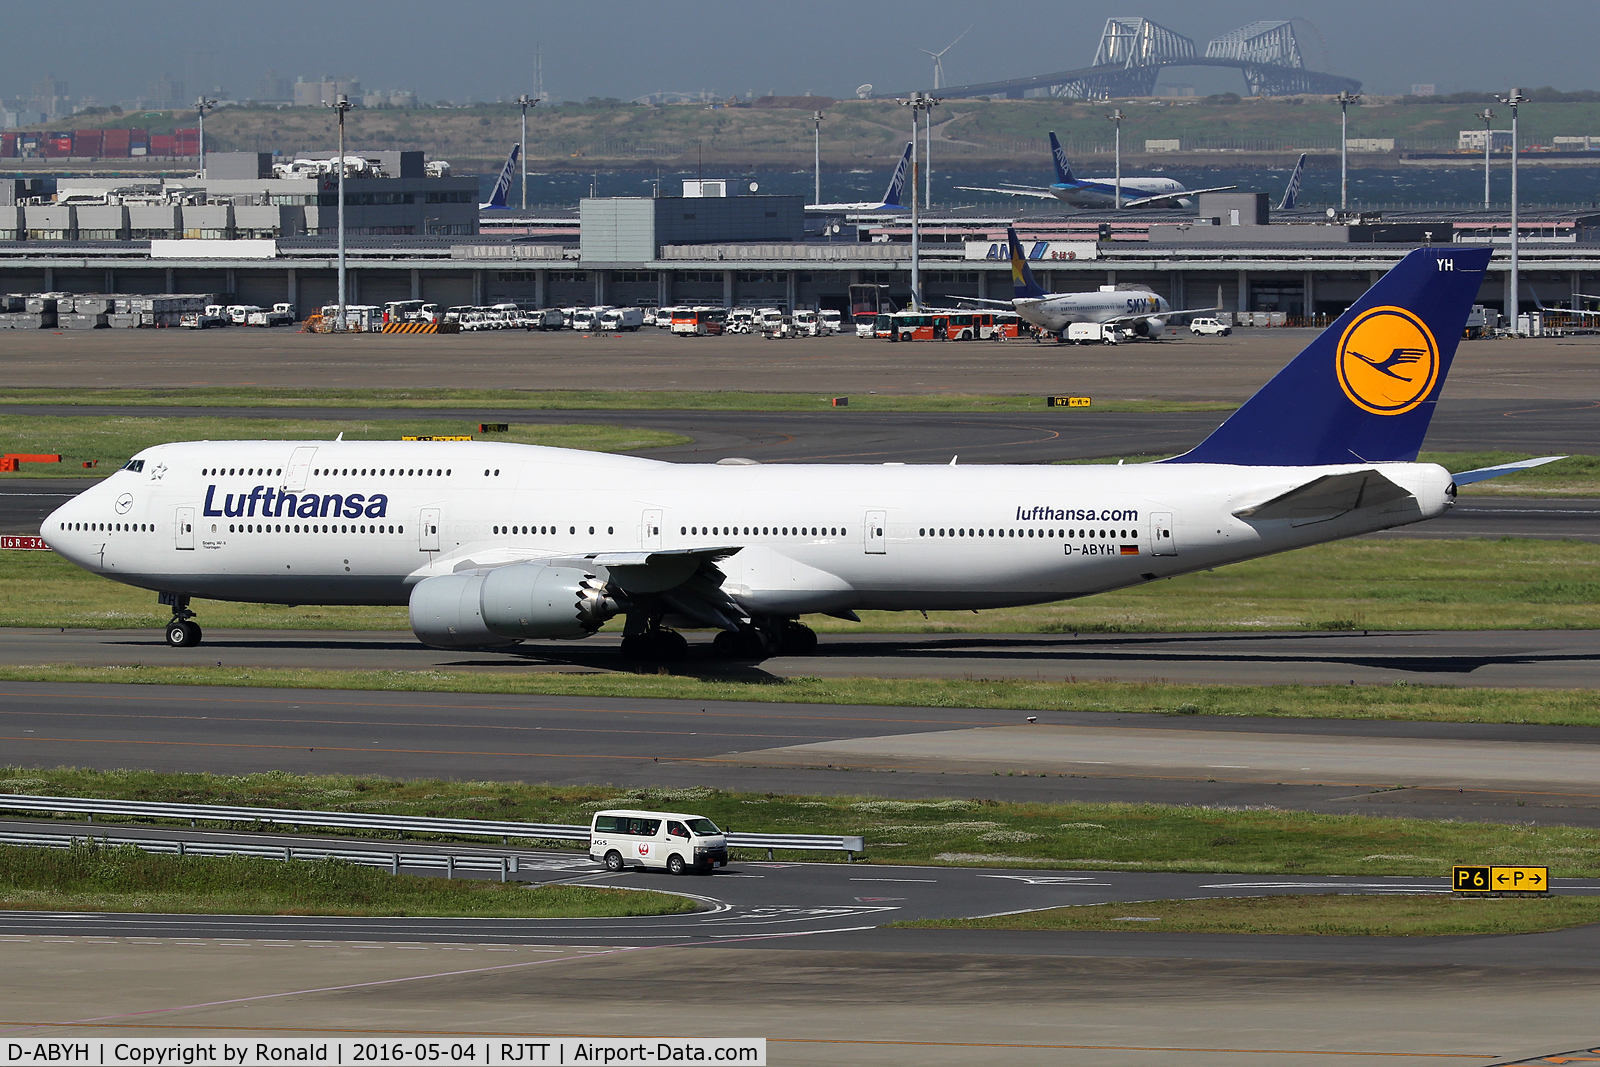 D-ABYH, 2013 Boeing 747-830 C/N 37832, at hnd